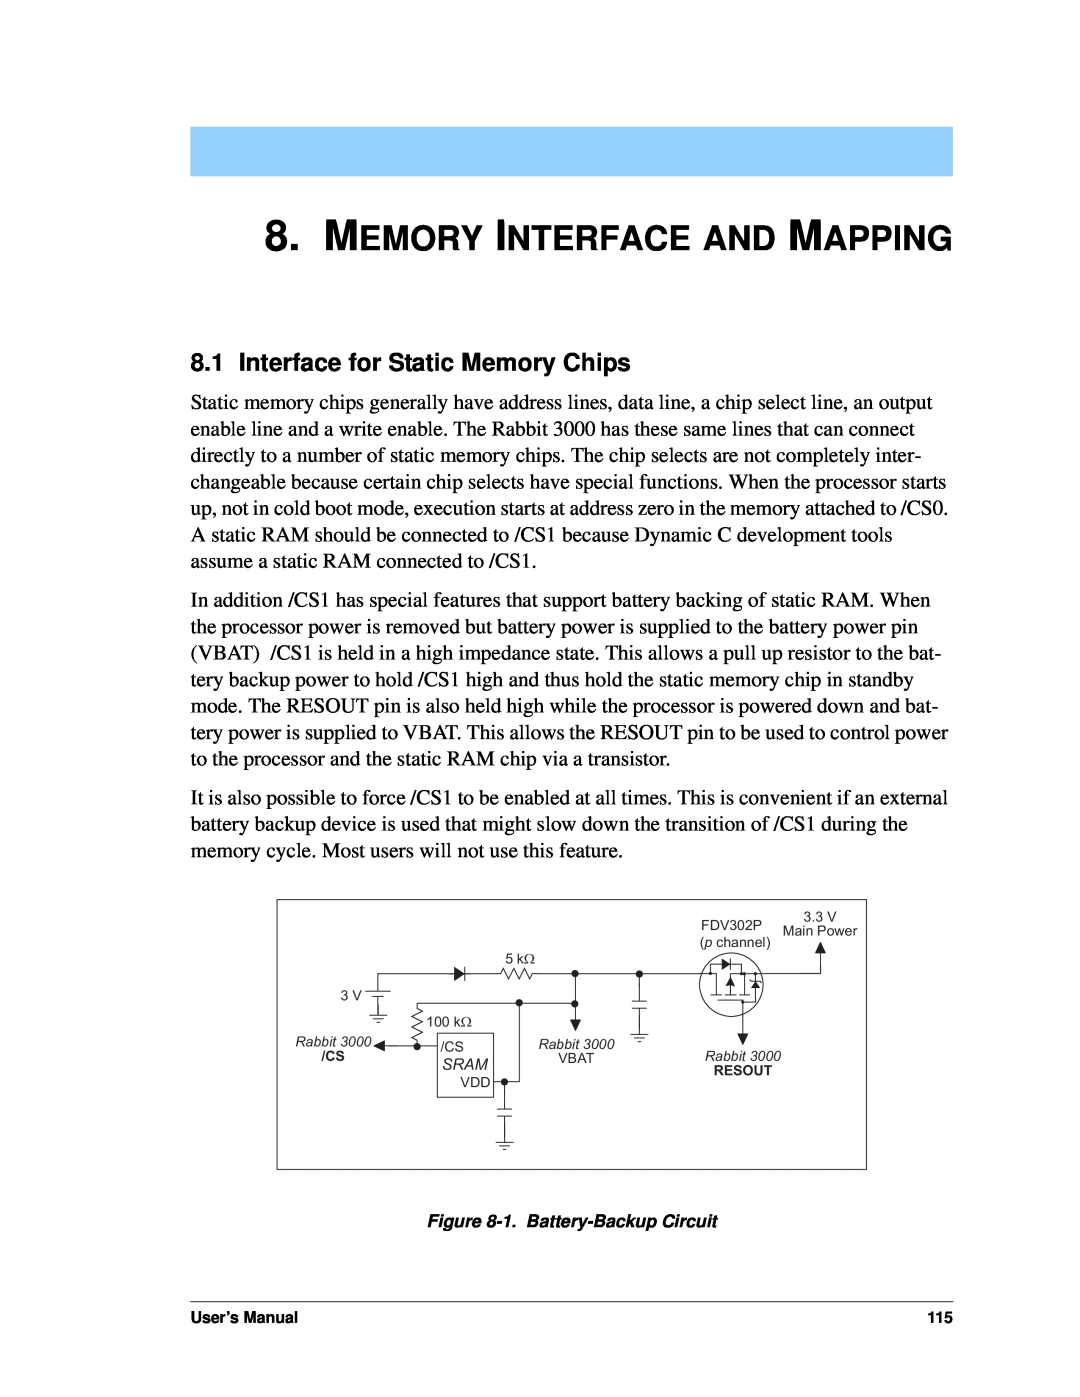 Jameco Electronics 3000, 2000 manual Memory Interface And Mapping, 8.1Interface for Static Memory Chips 